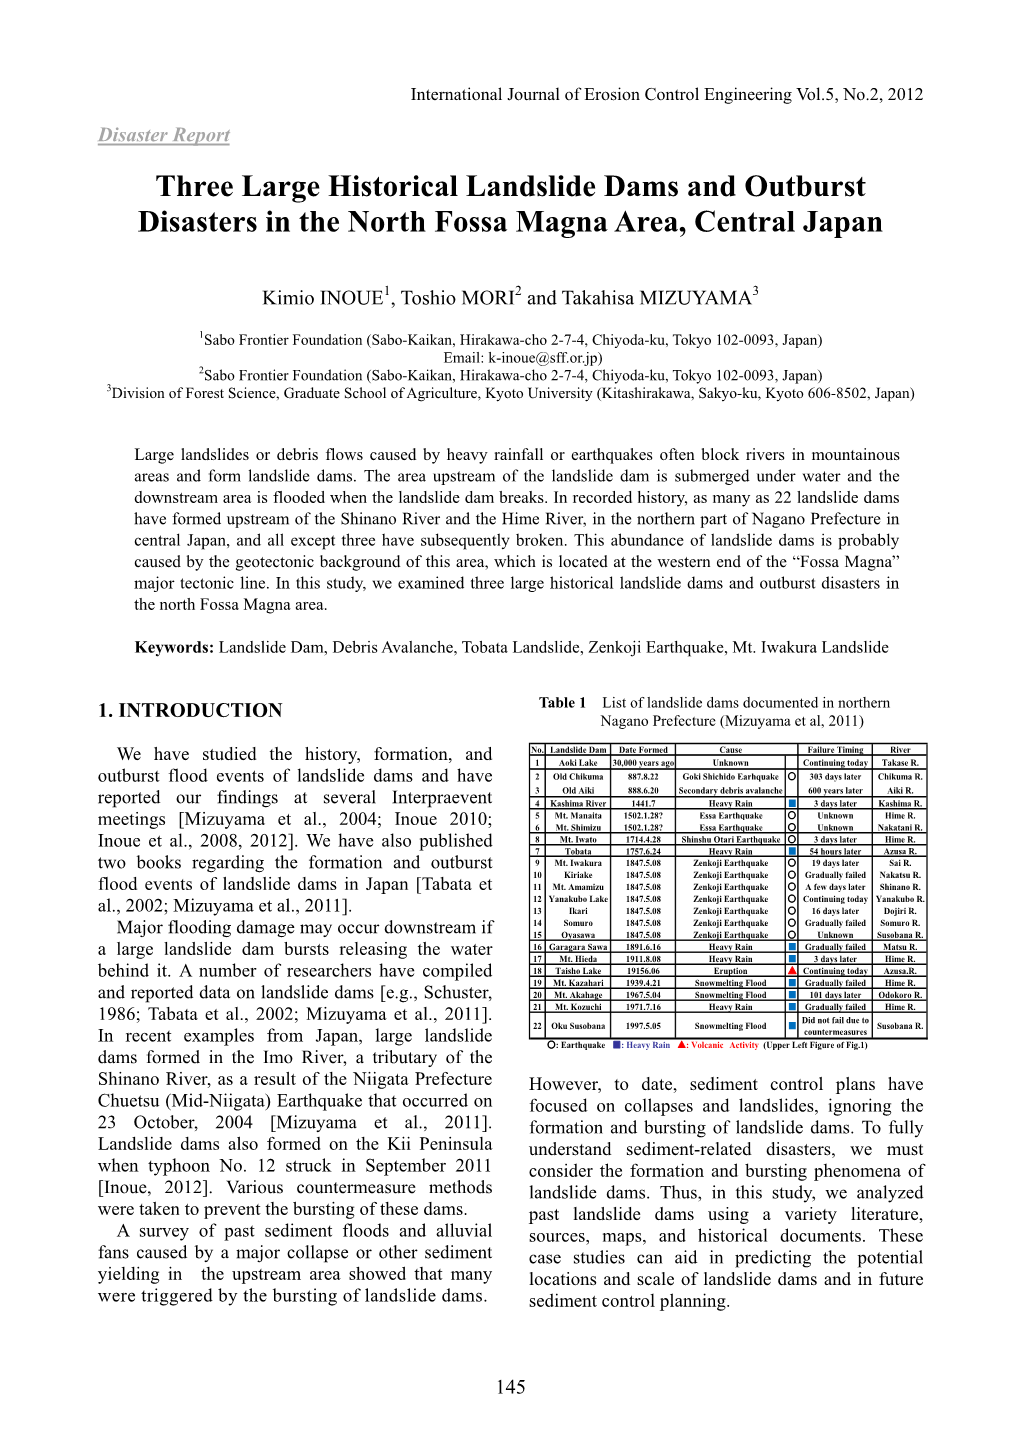 Three Large Historical Landslide Dams and Outburst Disasters in the North Fossa Magna Area, Central Japan